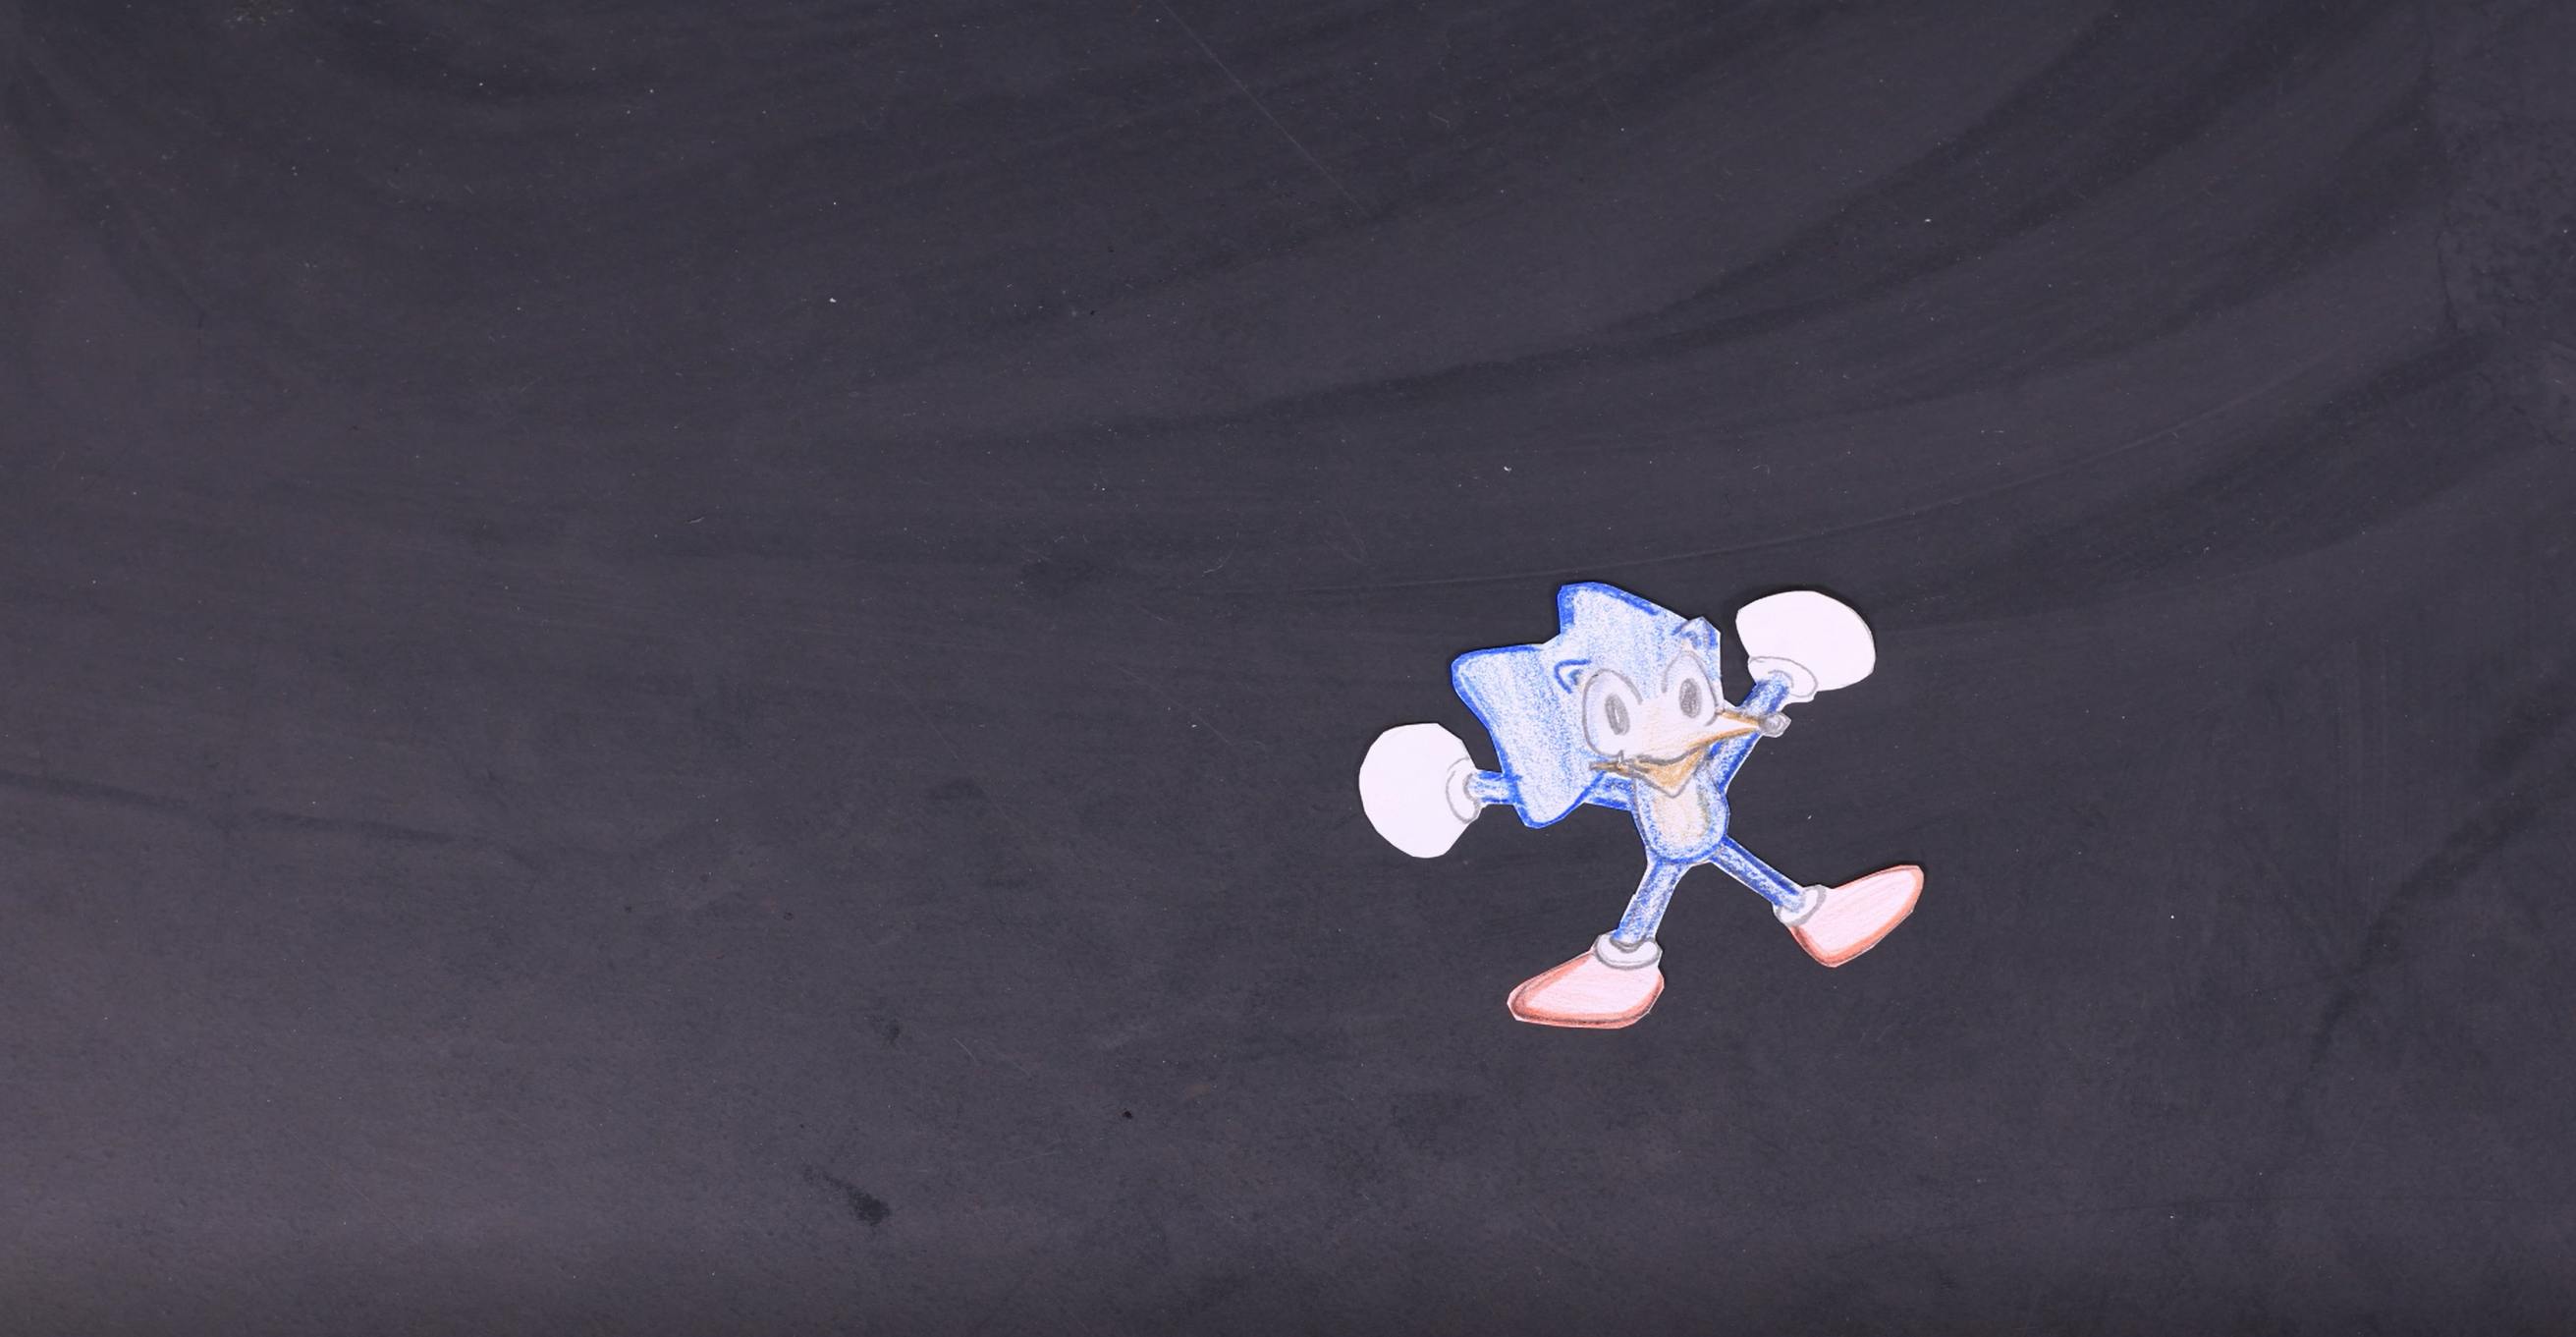 Image of Sonic the Hedgehog made out of paper with his limbs extended